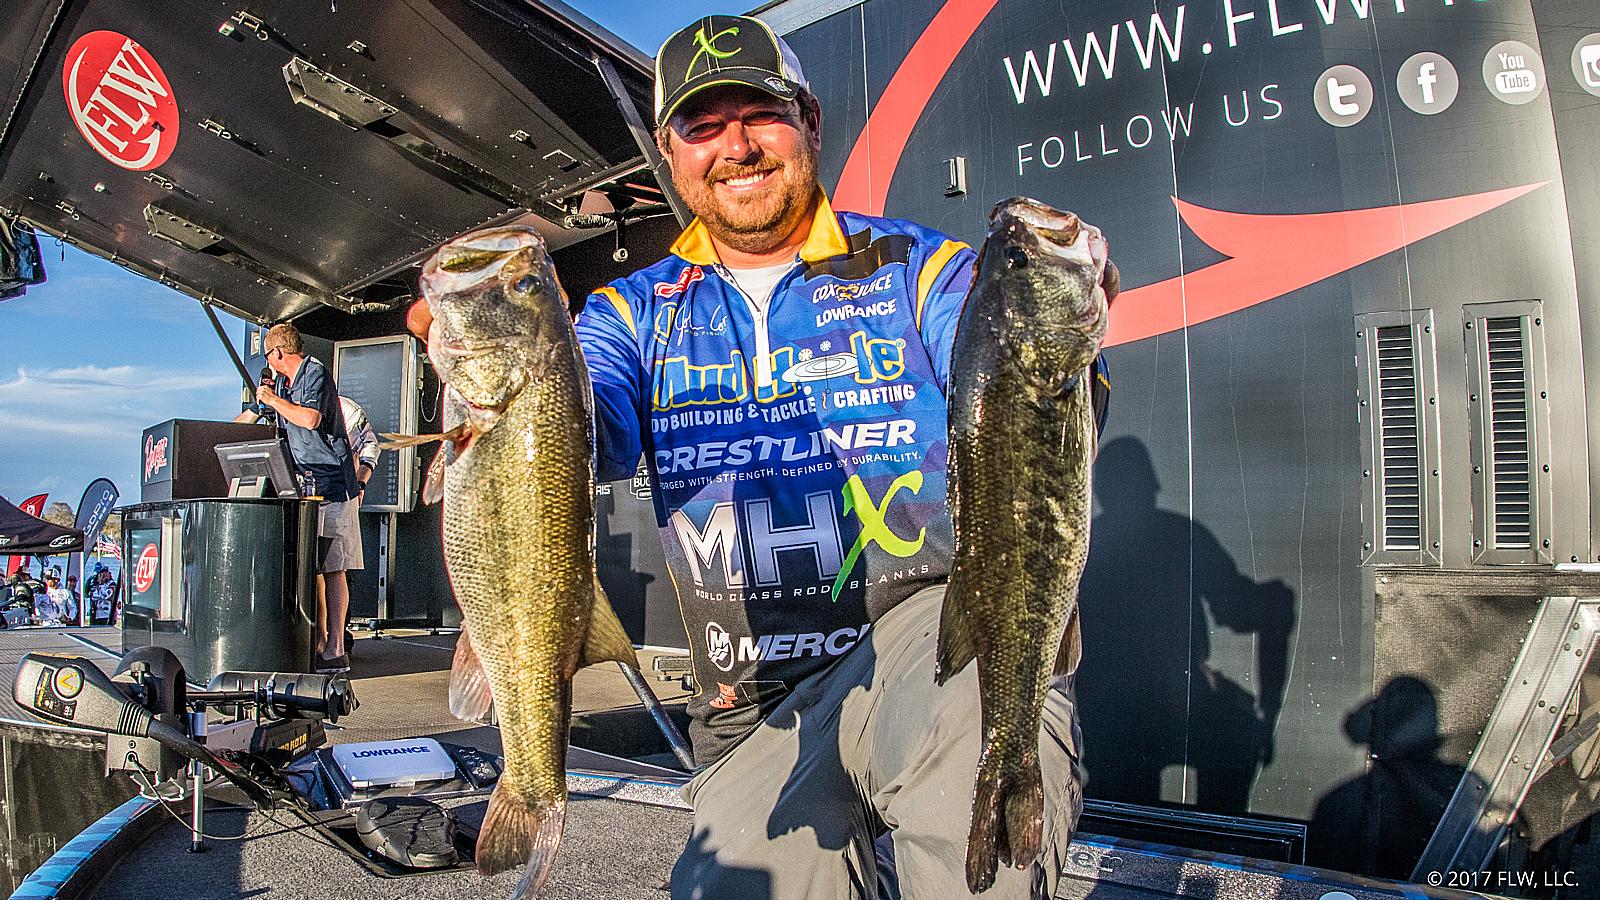 Cox Extends Lead at Day Two of FLW Tour at Harris Chain of Lakes presented  by Ranger Boats - Major League Fishing